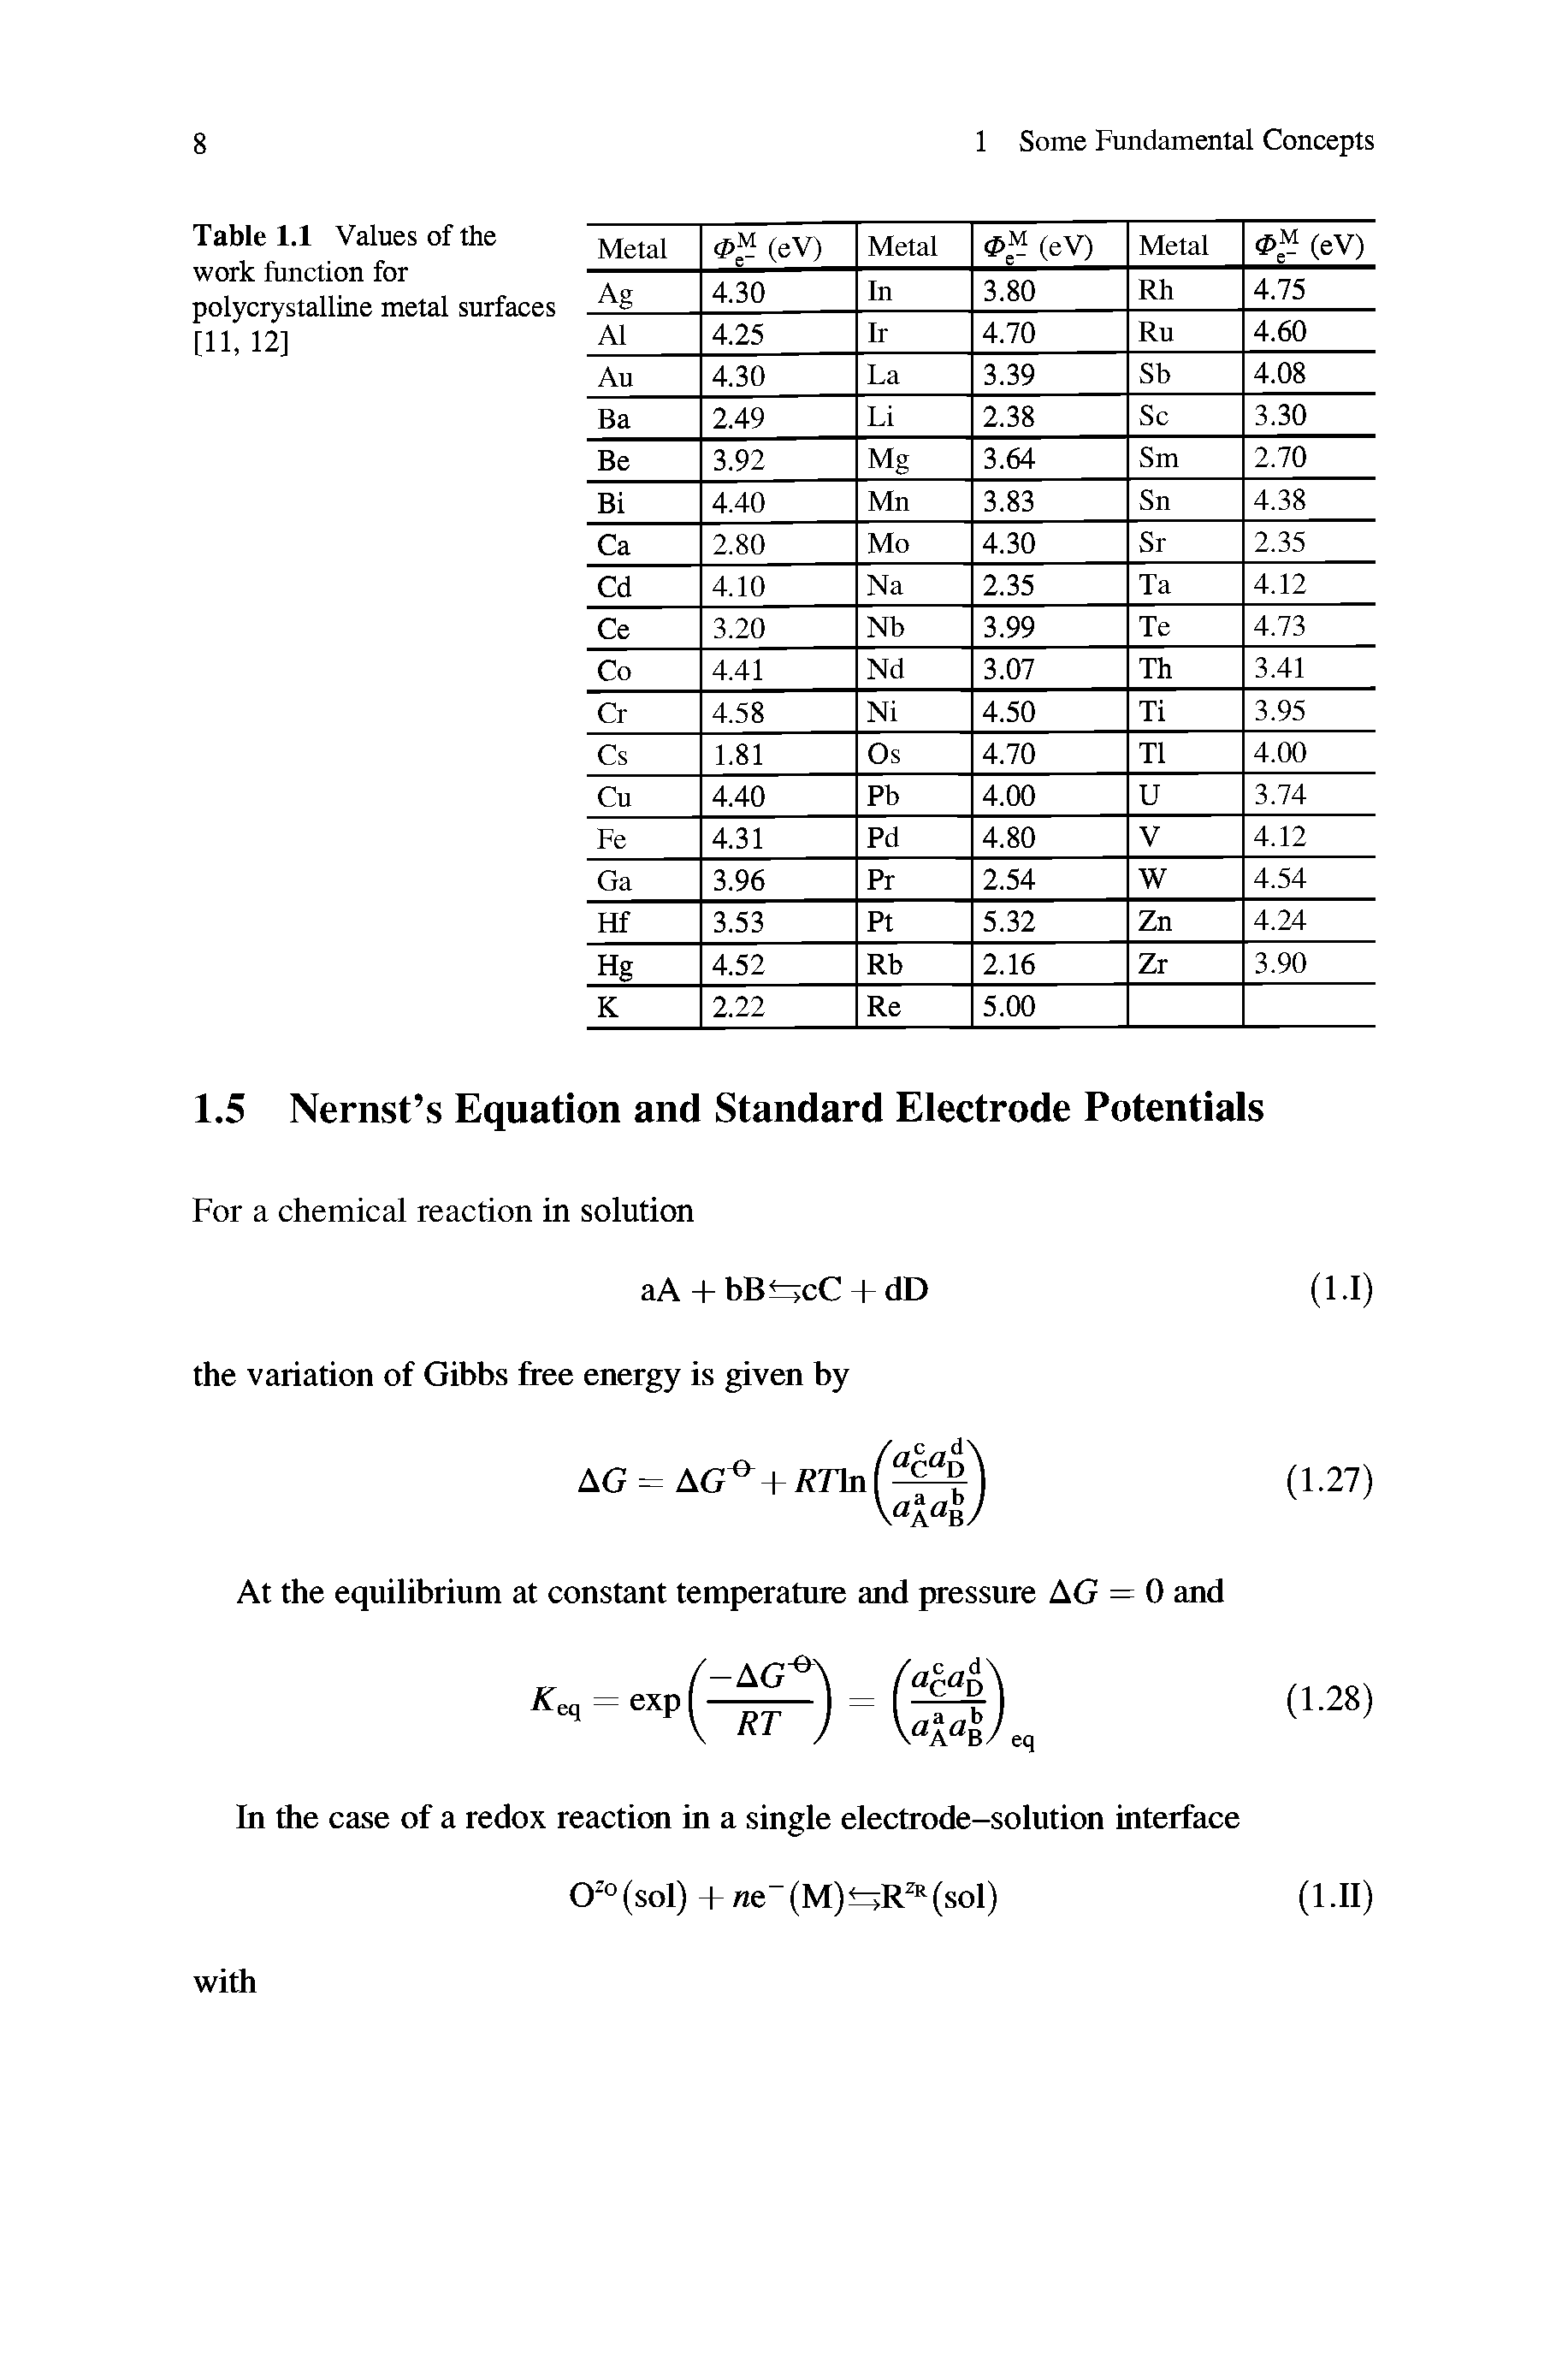 Table 1.1 Values of the work function for polycrystalline metal surfaces [11, 12]...